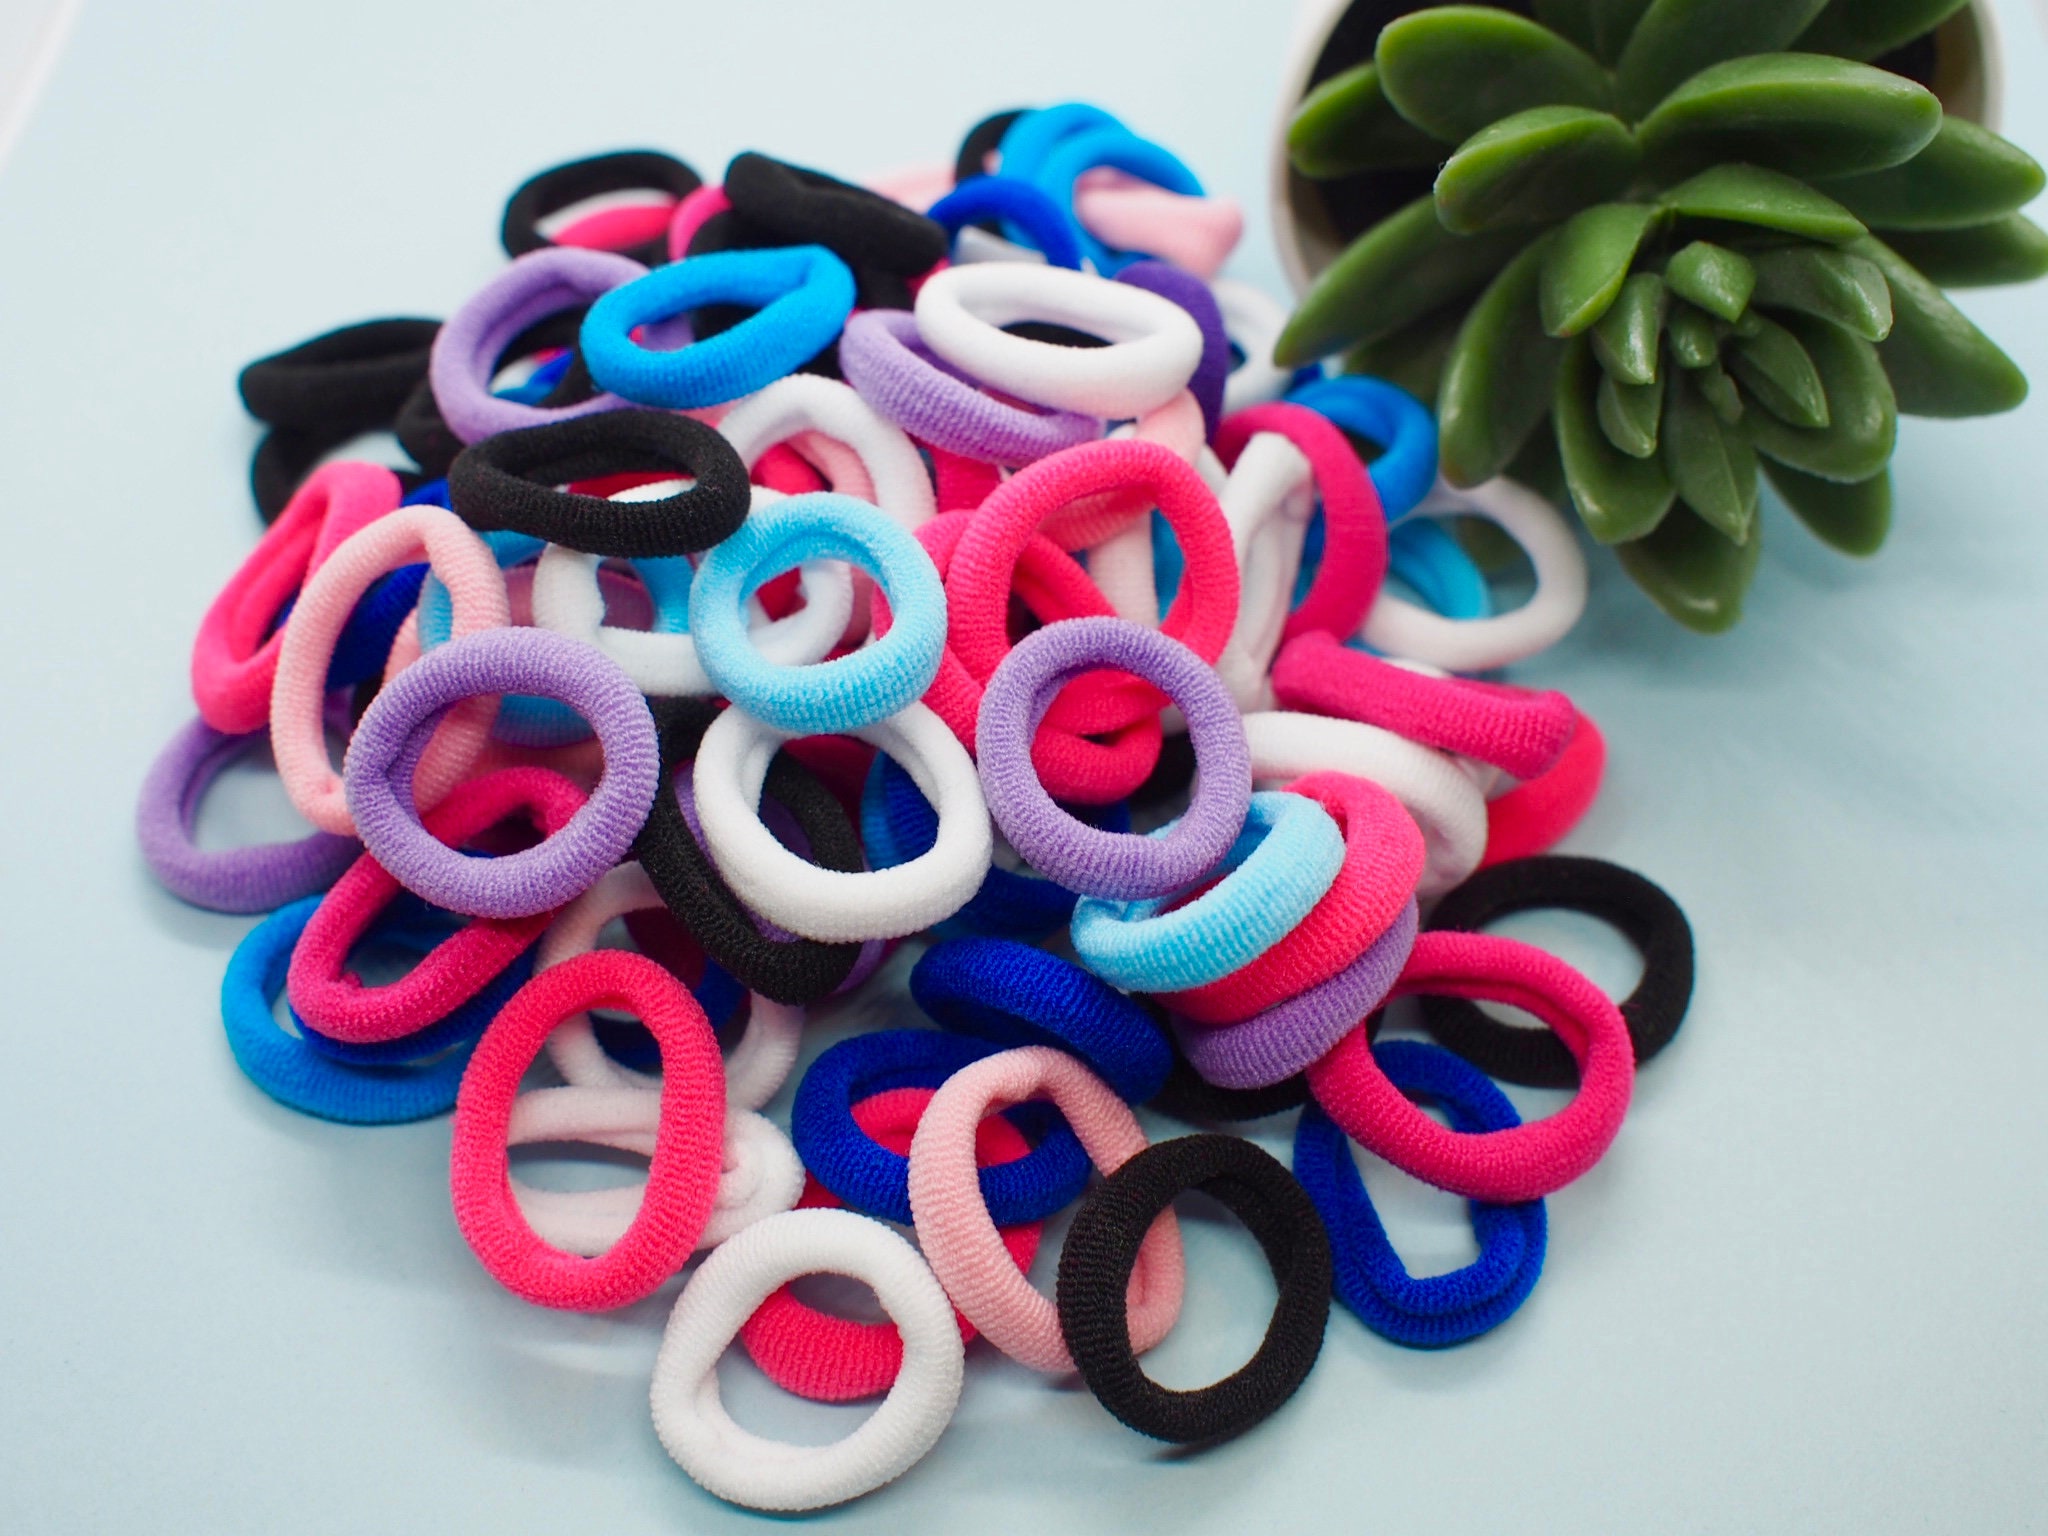 The Best Hair Ties For Fine Hair (2022) – Reviews | 20 Pcs Black Spiral Hair  Ties For Women Coil Hair Ties Hair Coils Plastic Hair Ties Hair Spirals No  Damage 